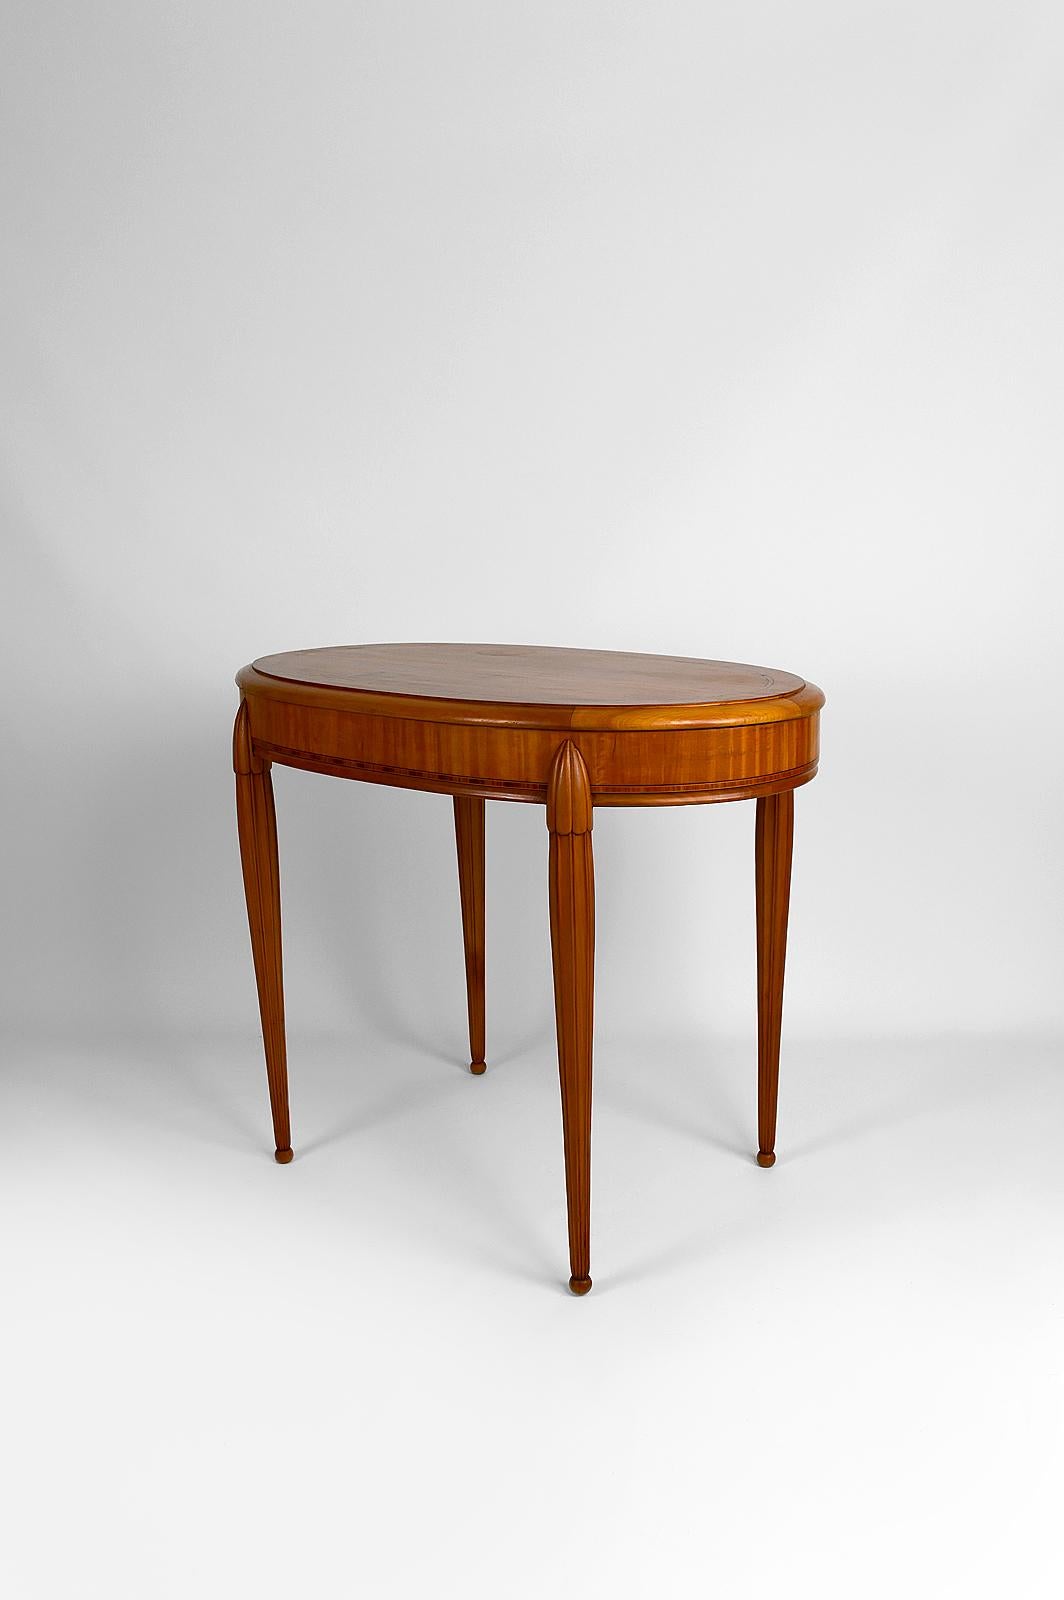 French Art Deco Oval Pedestal Table with Marquetry, France, circa 1920